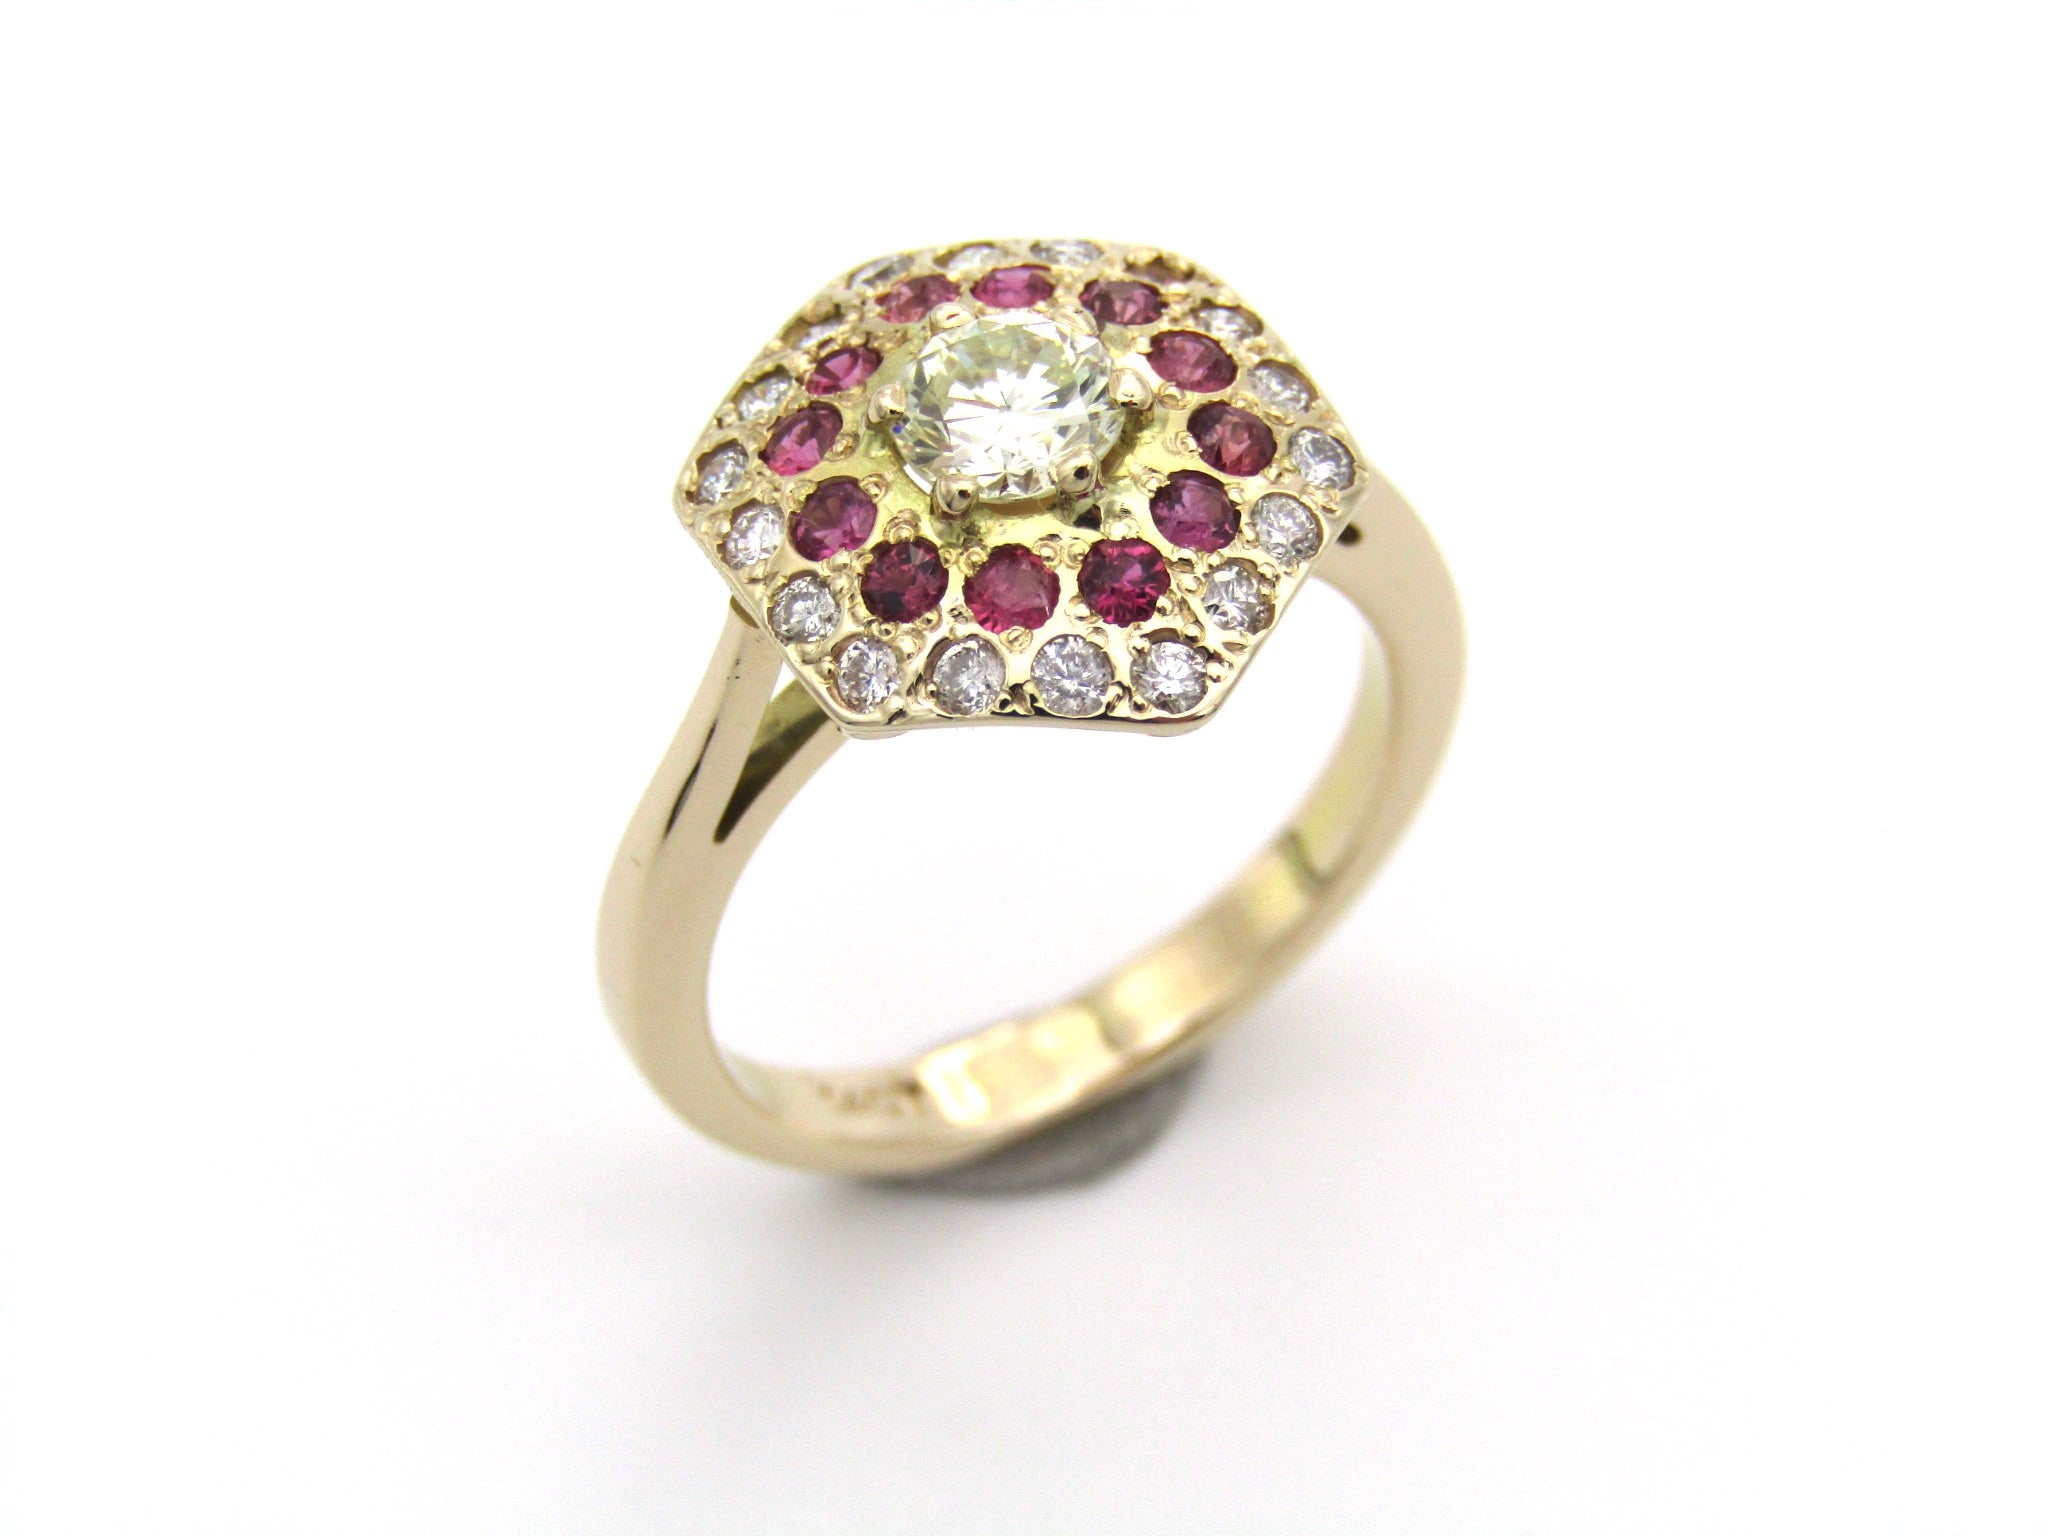 14K gold diamond and ruby ring.